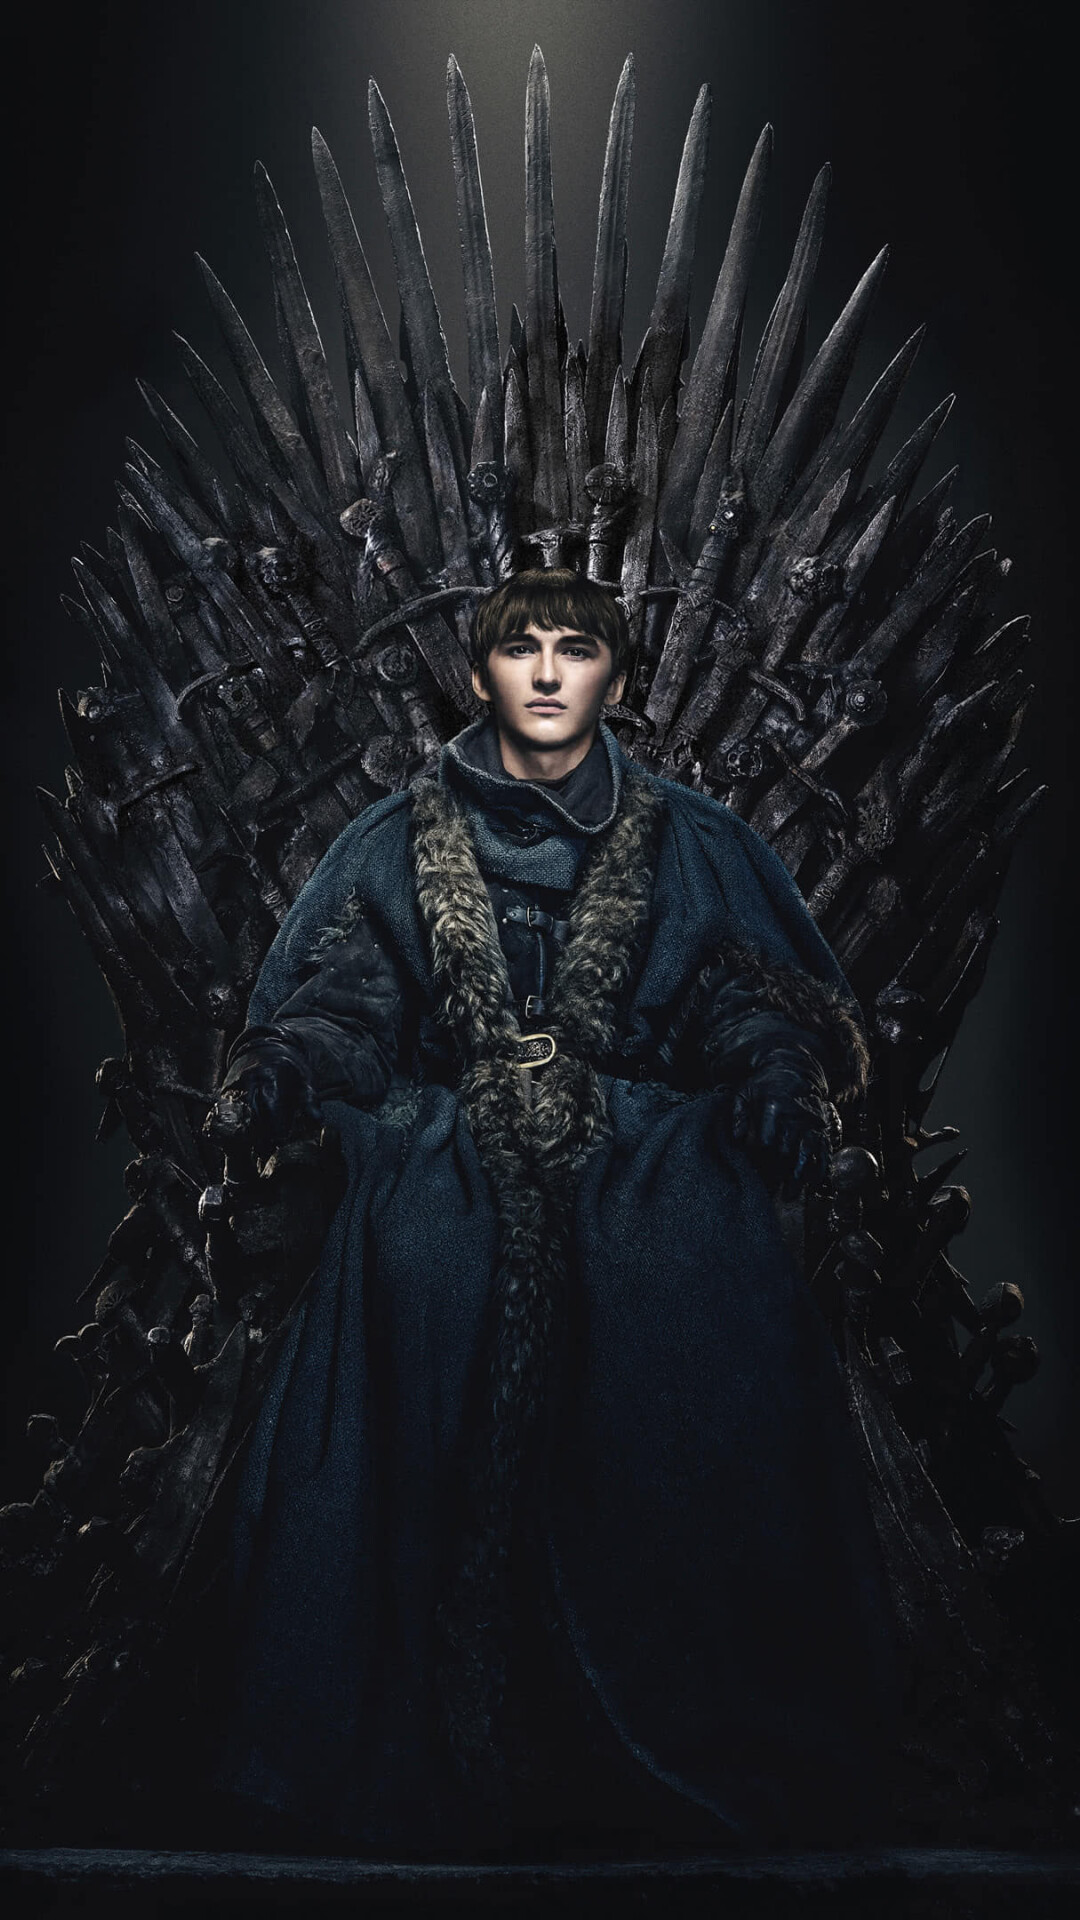 Game of Thrones: Bran Stark, the second son and fourth child of Lord Eddard and Lady Catelyn Stark of Winterfell. 1080x1920 Full HD Background.